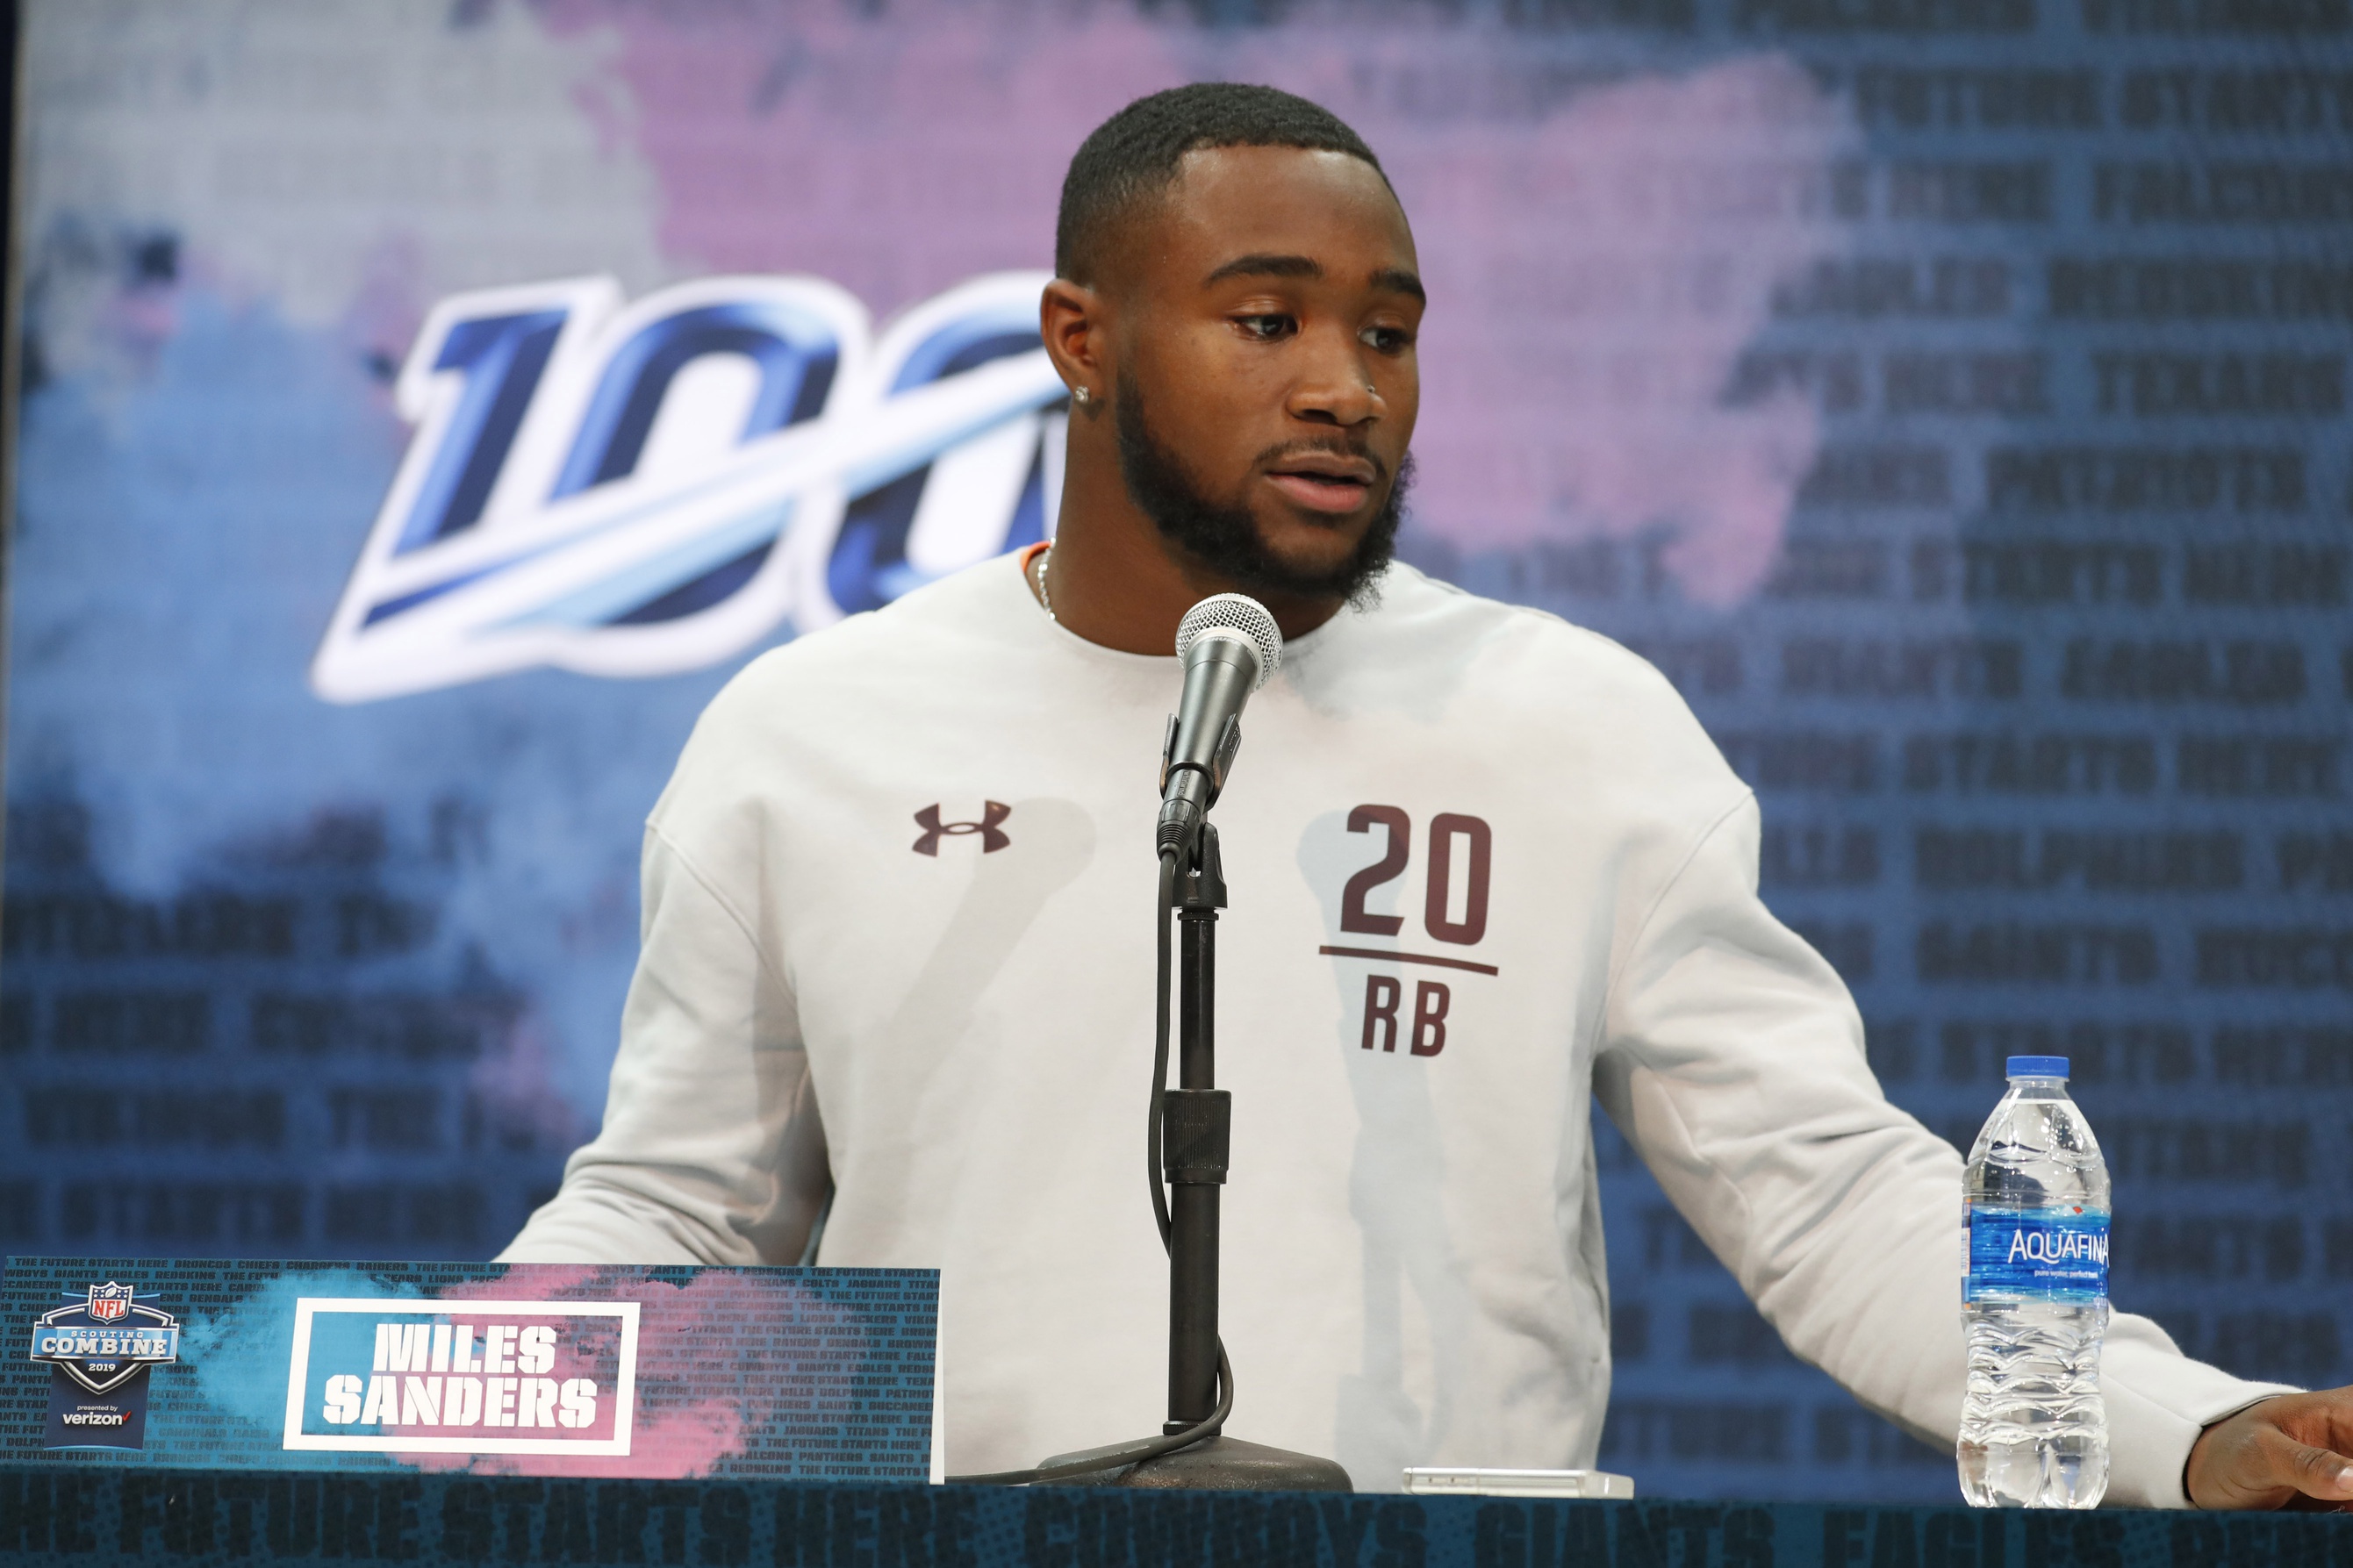 Eagles Select Penn State RB Miles Sanders With 53rd Overall Pick